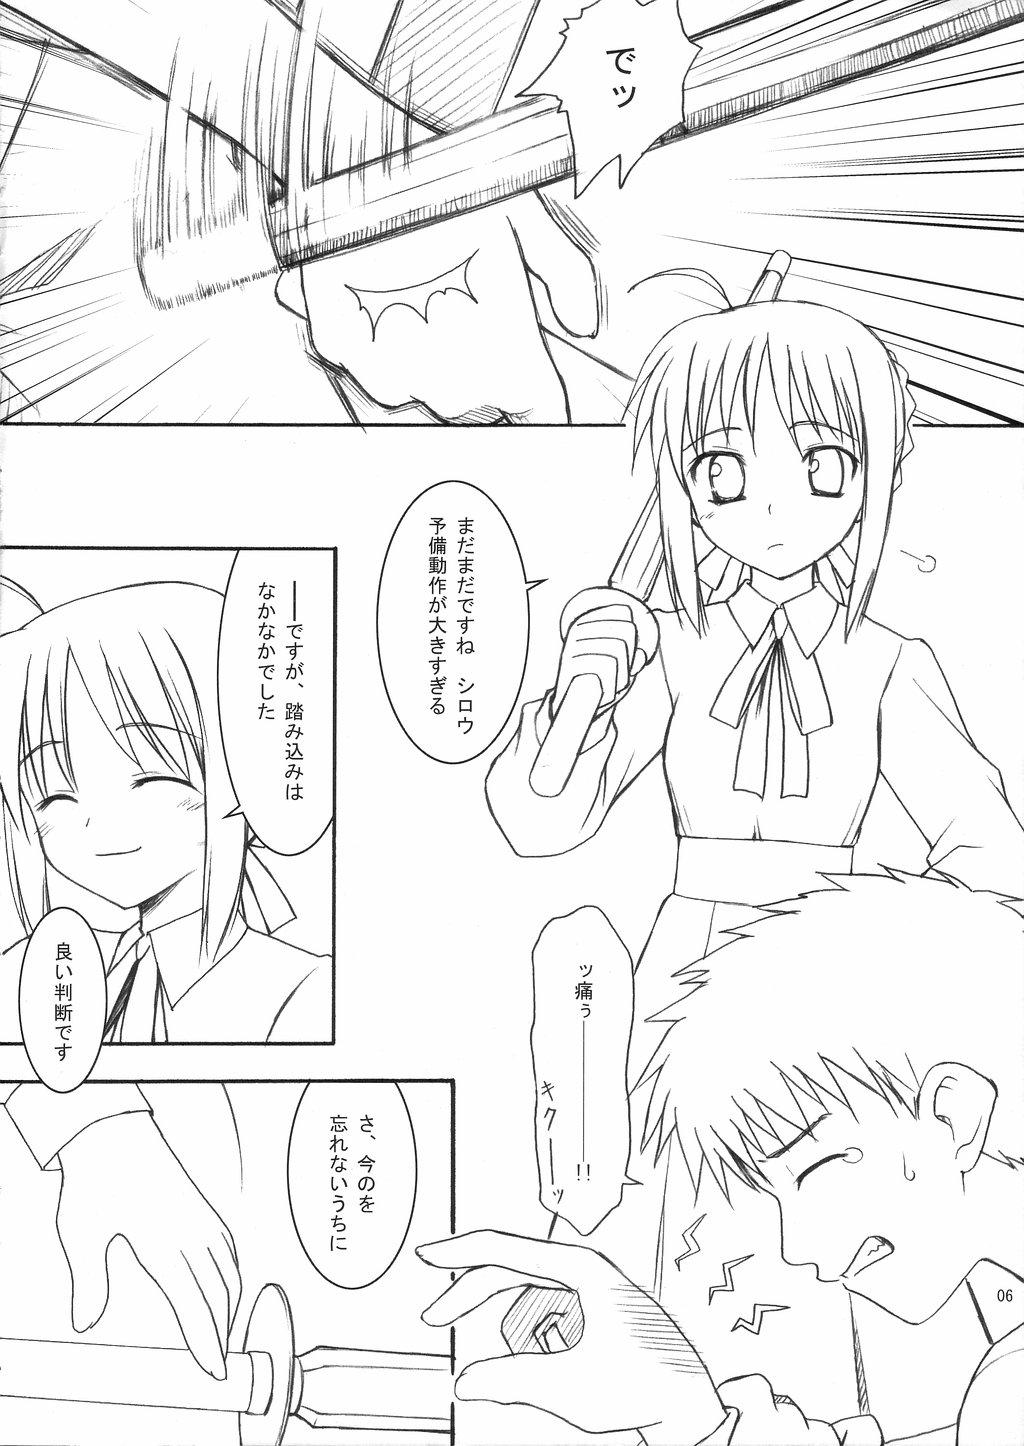 Culo My Twilight - Fate stay night Soapy Massage - Page 5